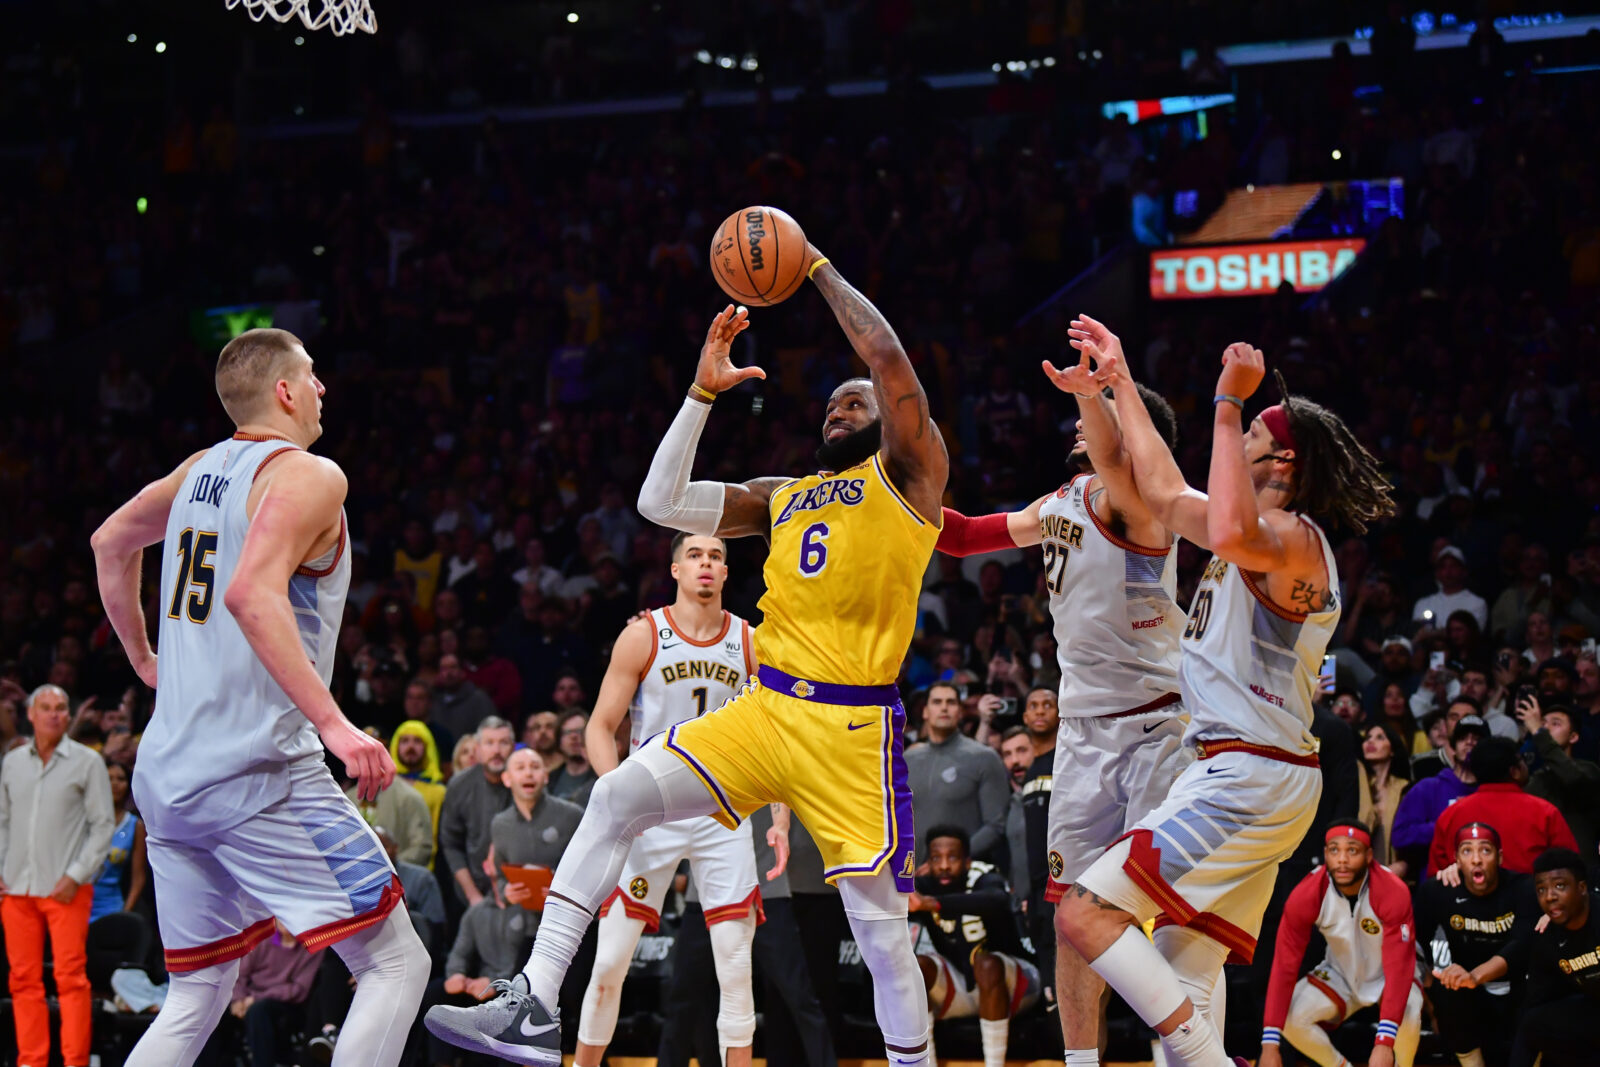 Rui Hachimura's Lakers swept in NBA Western Conference finals